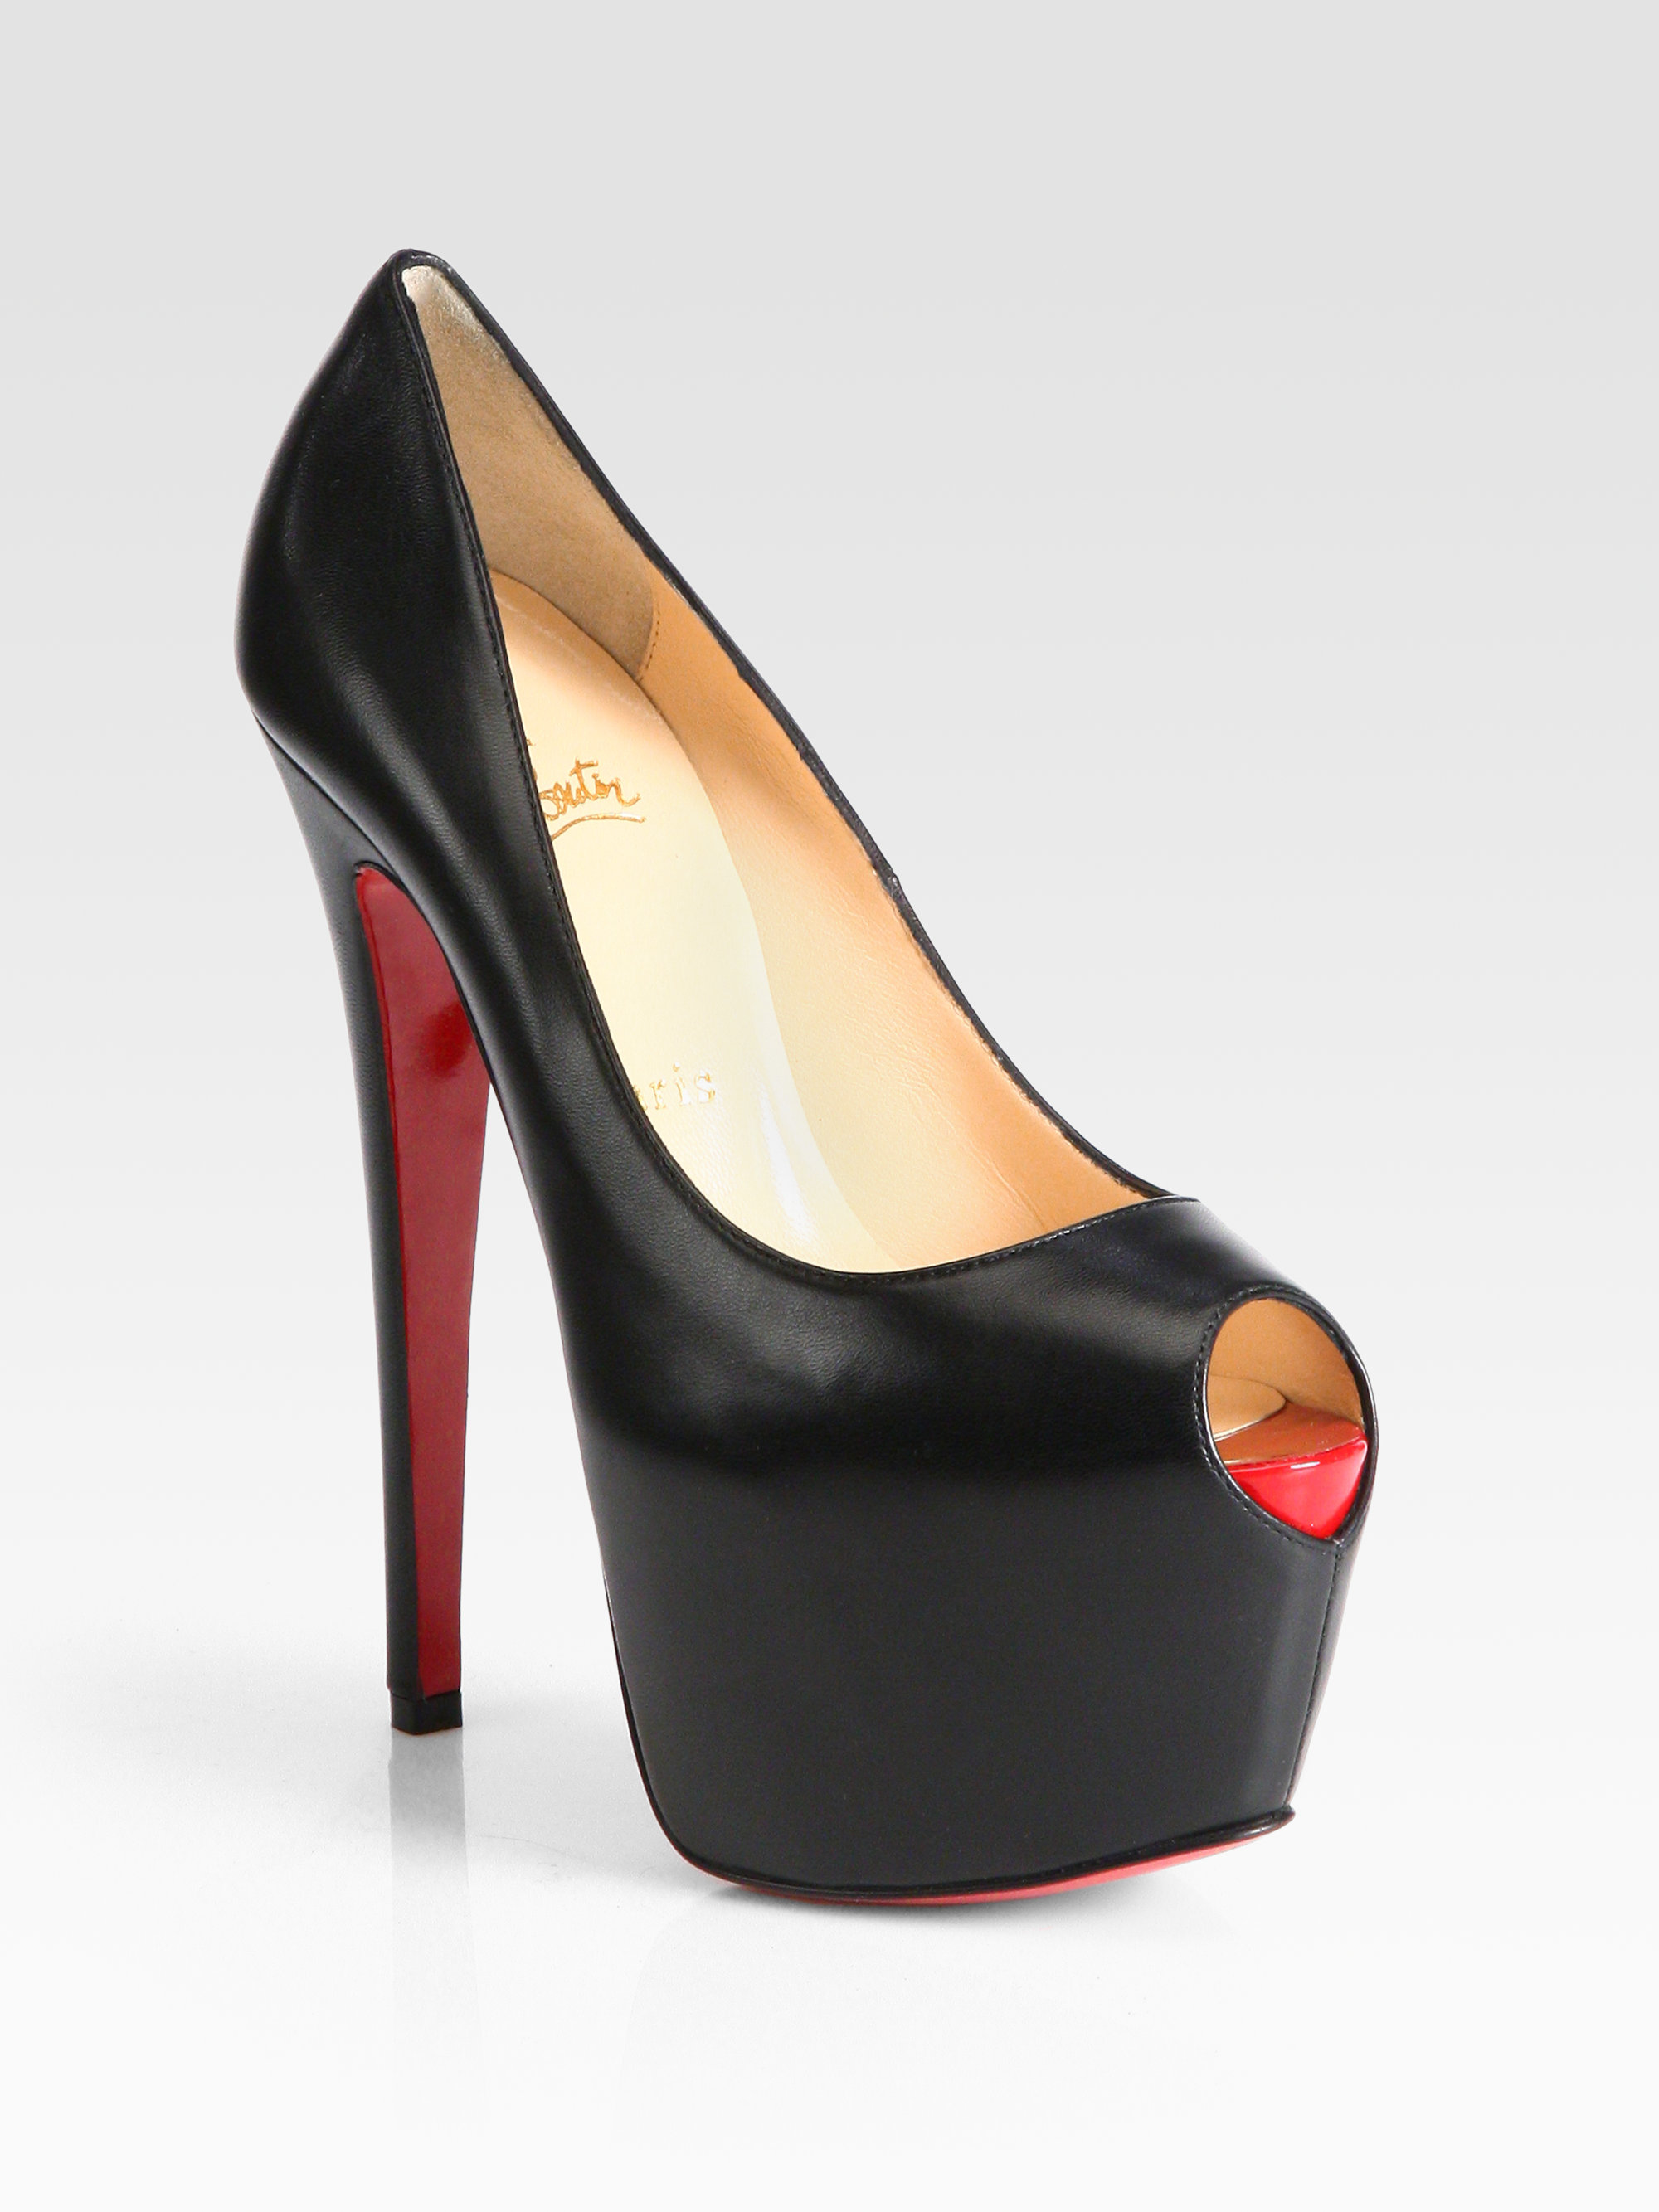 Christian Louboutin Highness Leather Platform Pumps in Black | Lyst